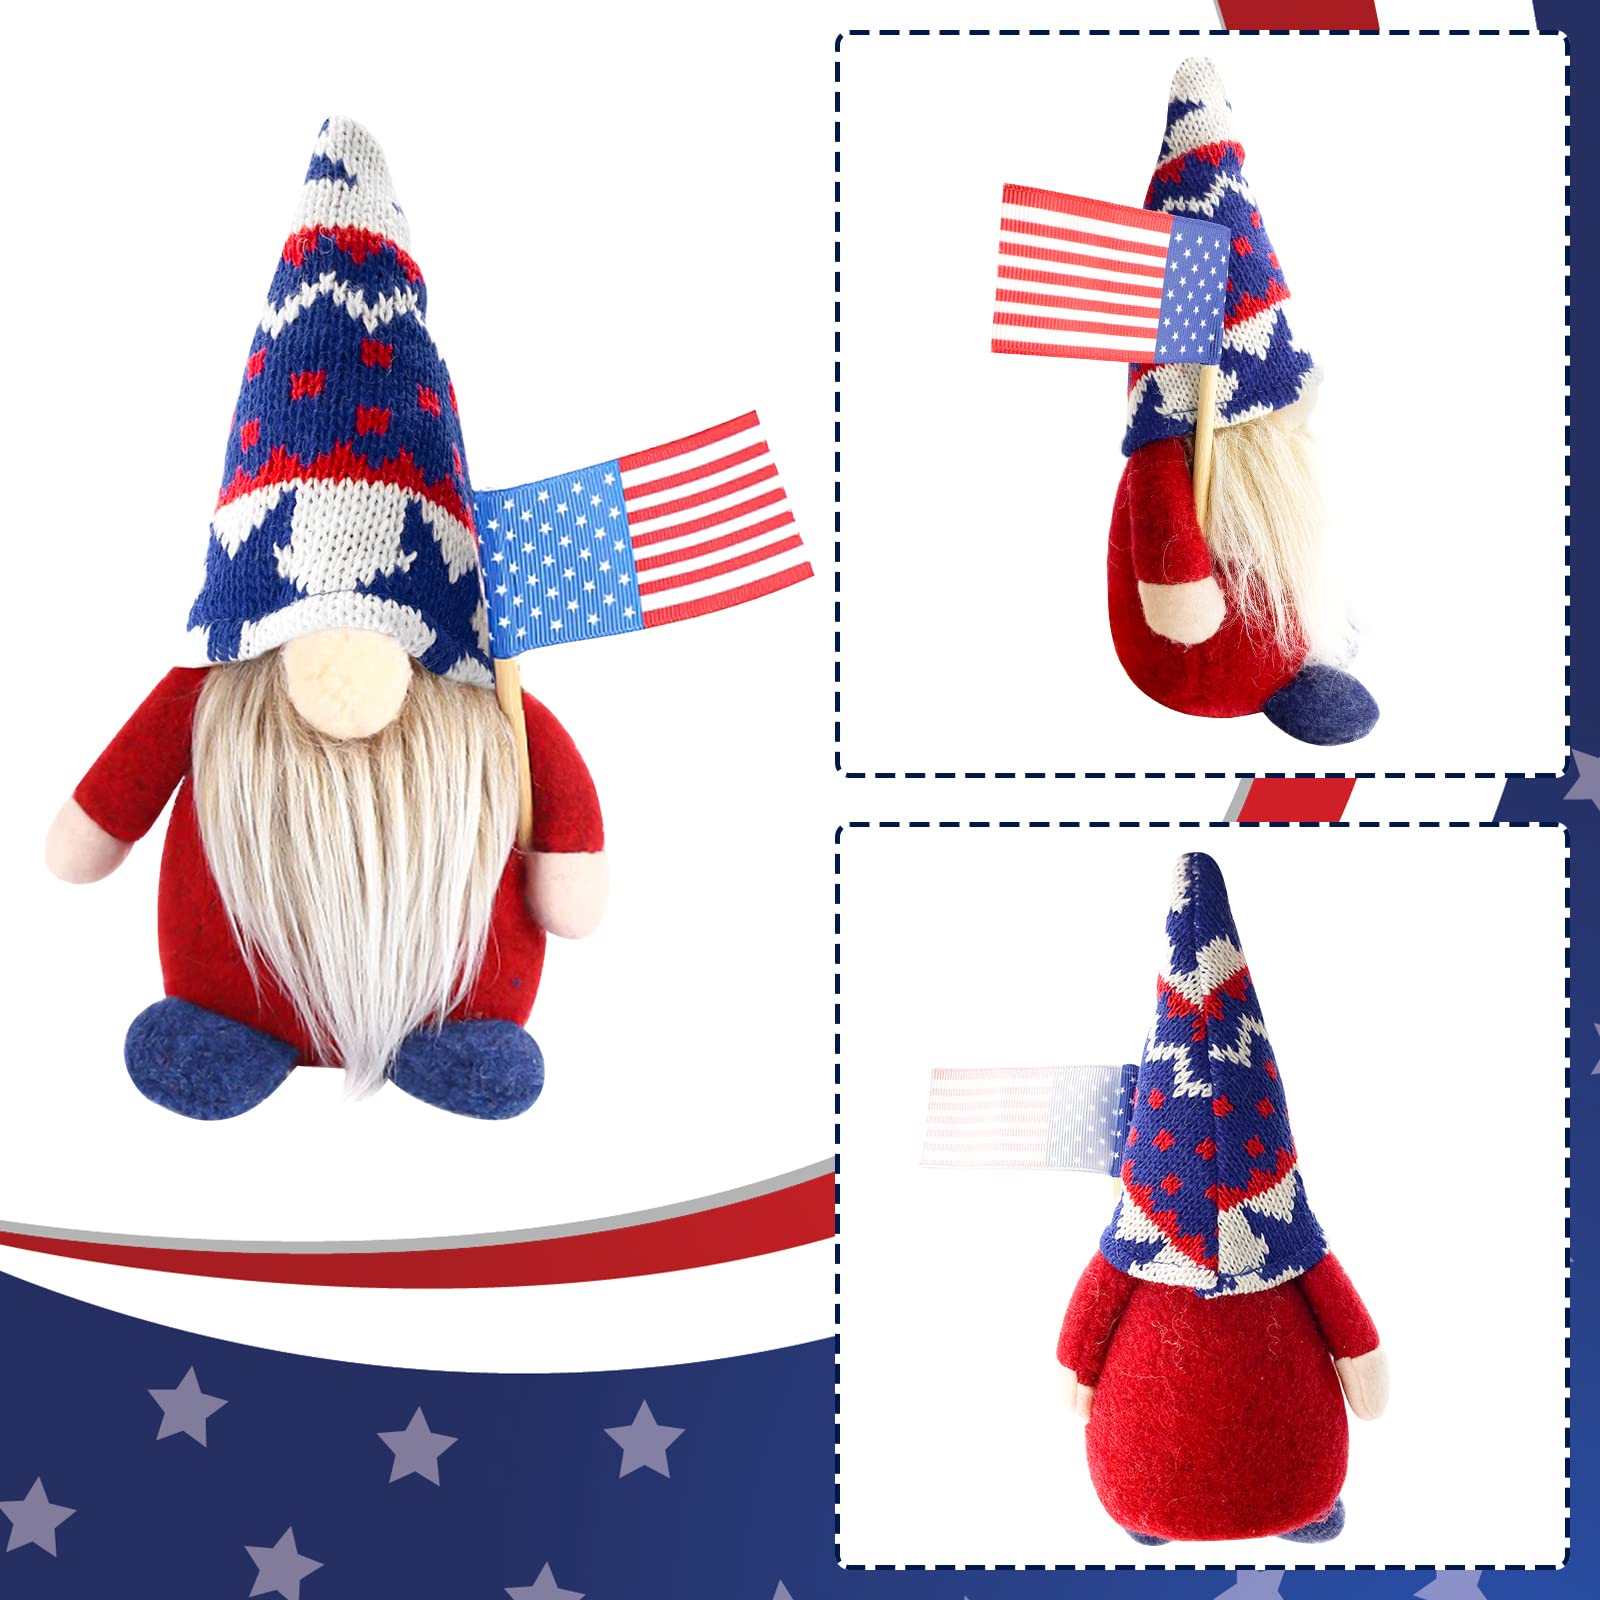 Lovinland New US Citizen Gifts, American Flag Gnomes, Birthday/Retirement/Veteran Christmas Thanksgiving Gifts for New Citizenship/Friend/Father/Grandpa/Adult, American Native Decor for Home